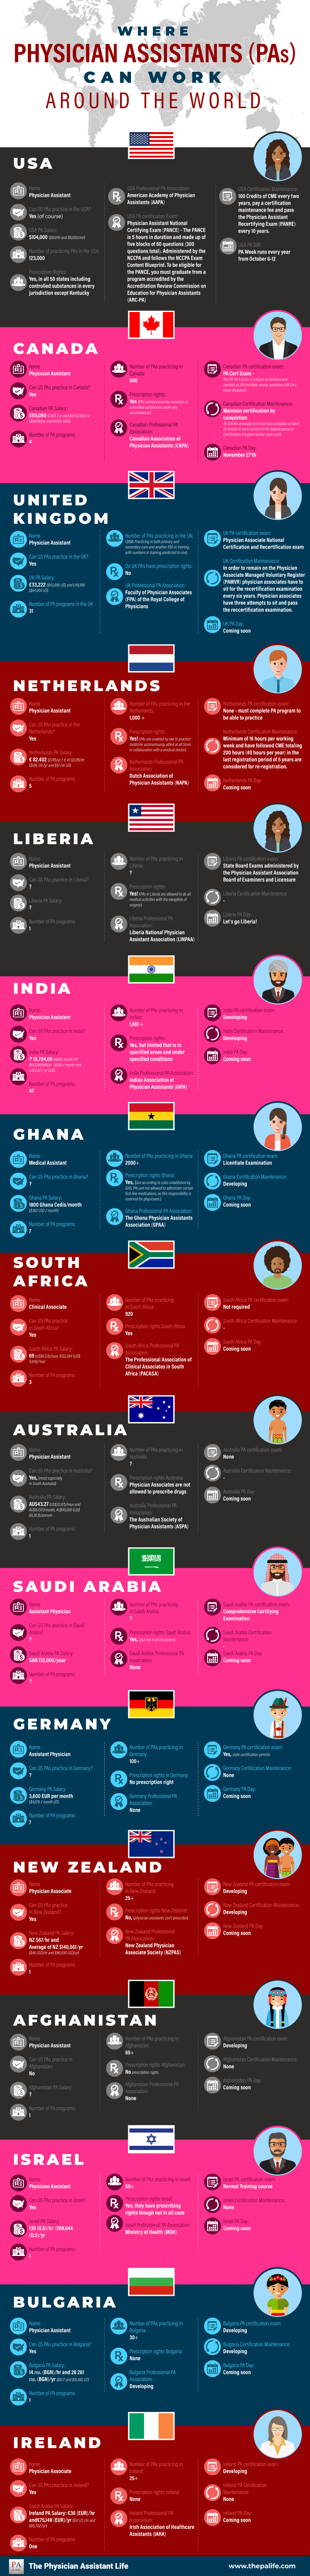 Infographic Where Physician Assistants (PAs) and Physician Associates-Can Work Internationally - Global PAs Work In Countries Around The World